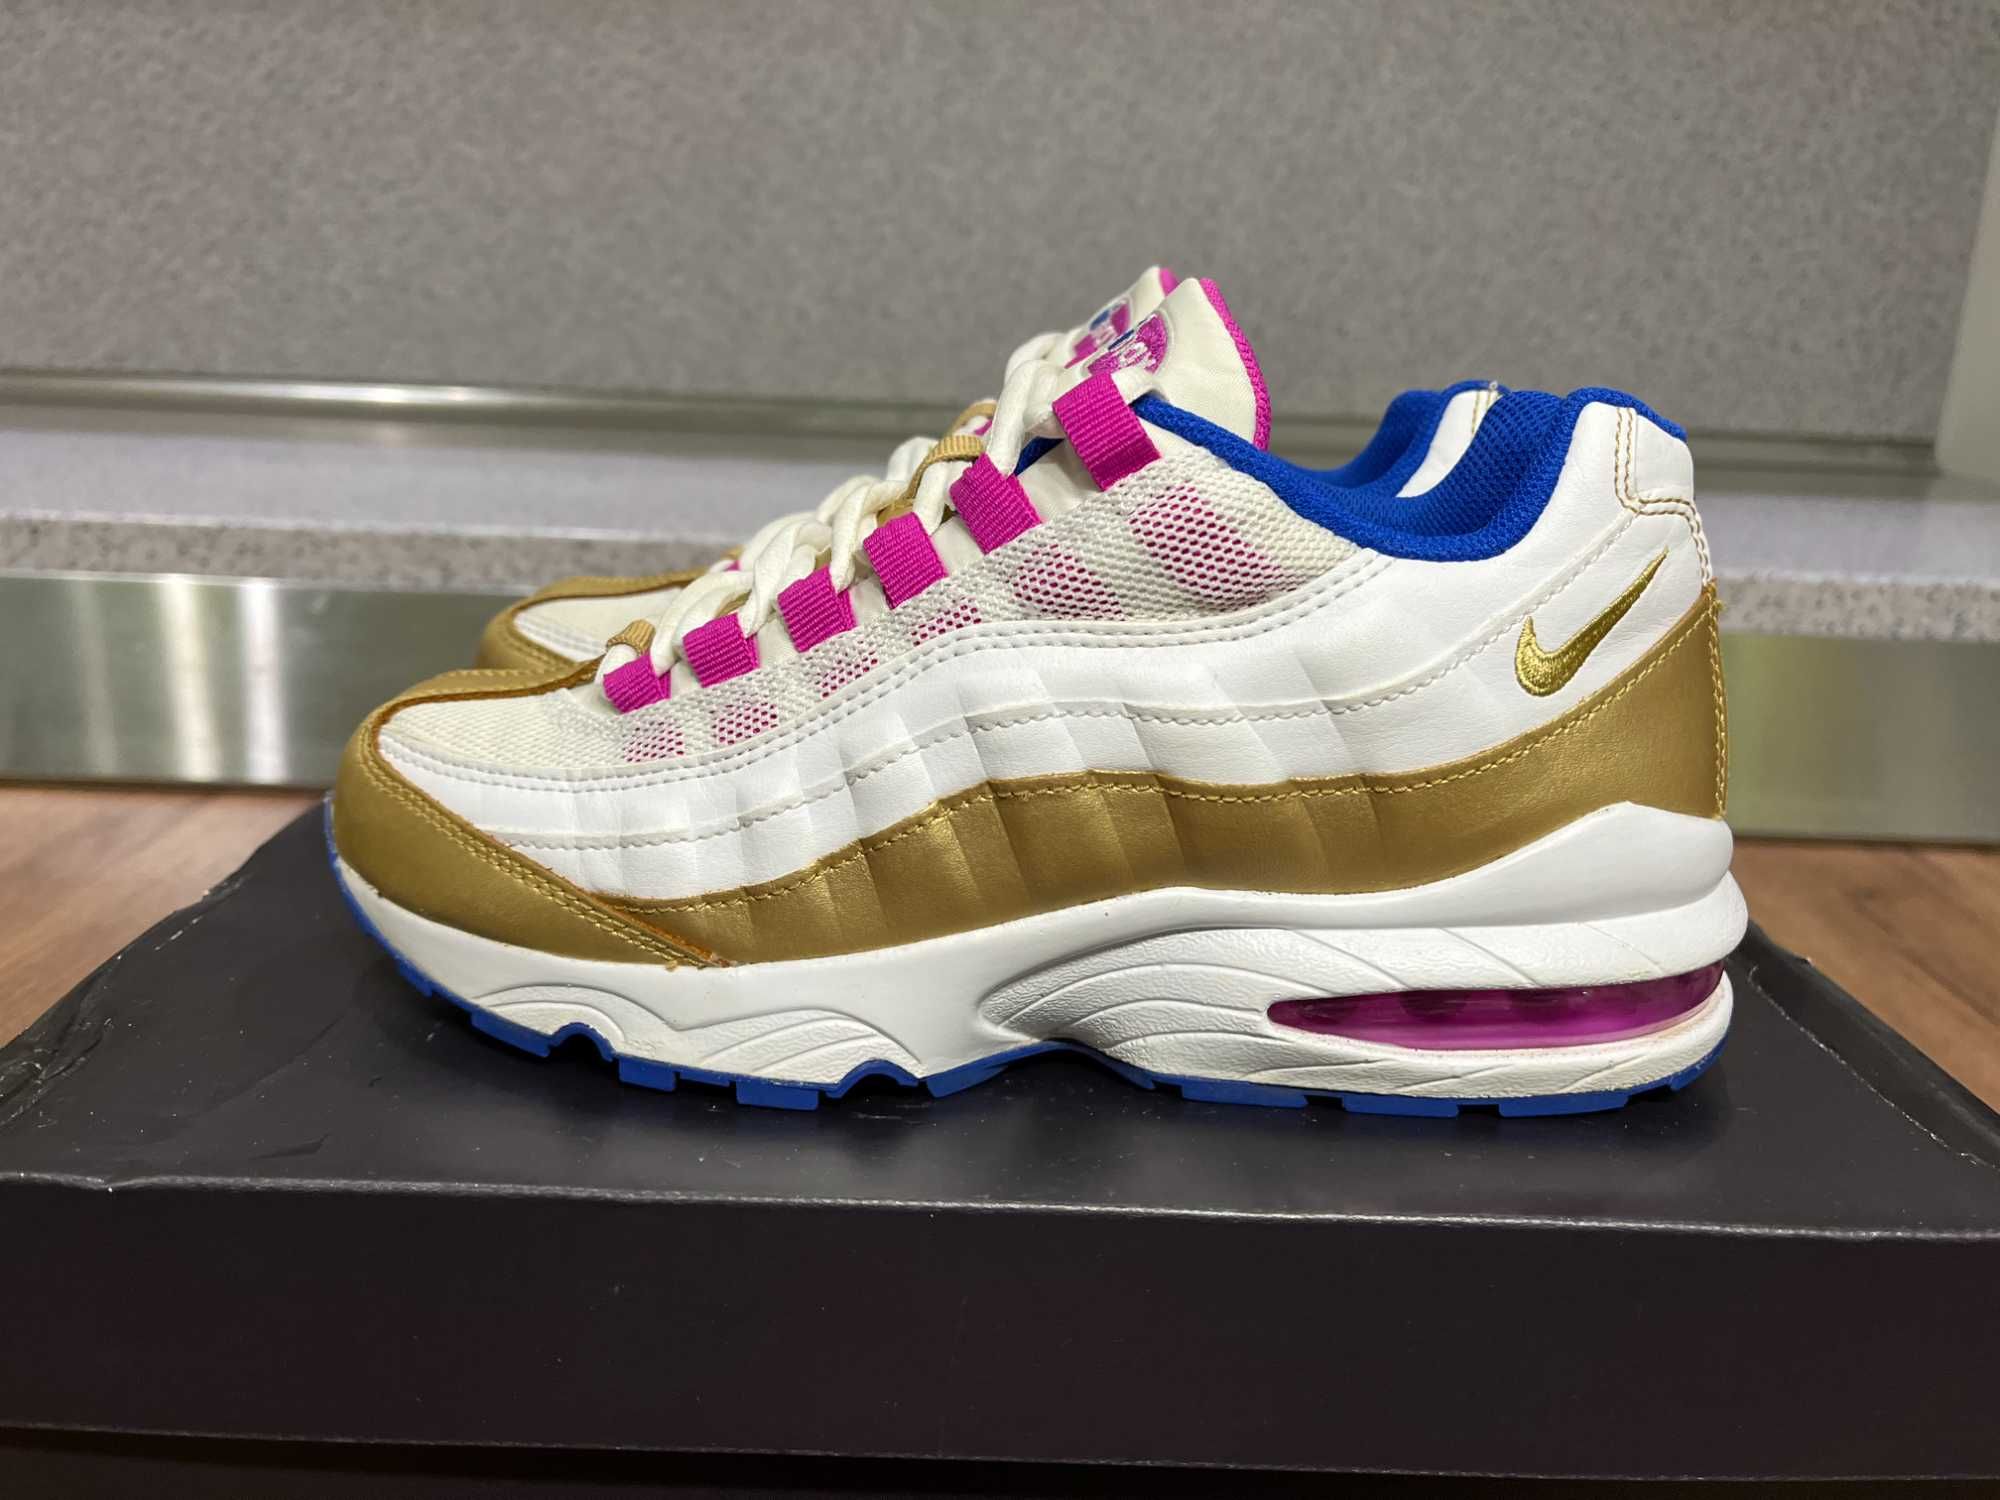 ОРИГИНАЛНИ *** Nike Air Max 95 / Peanut Butter & Jelly